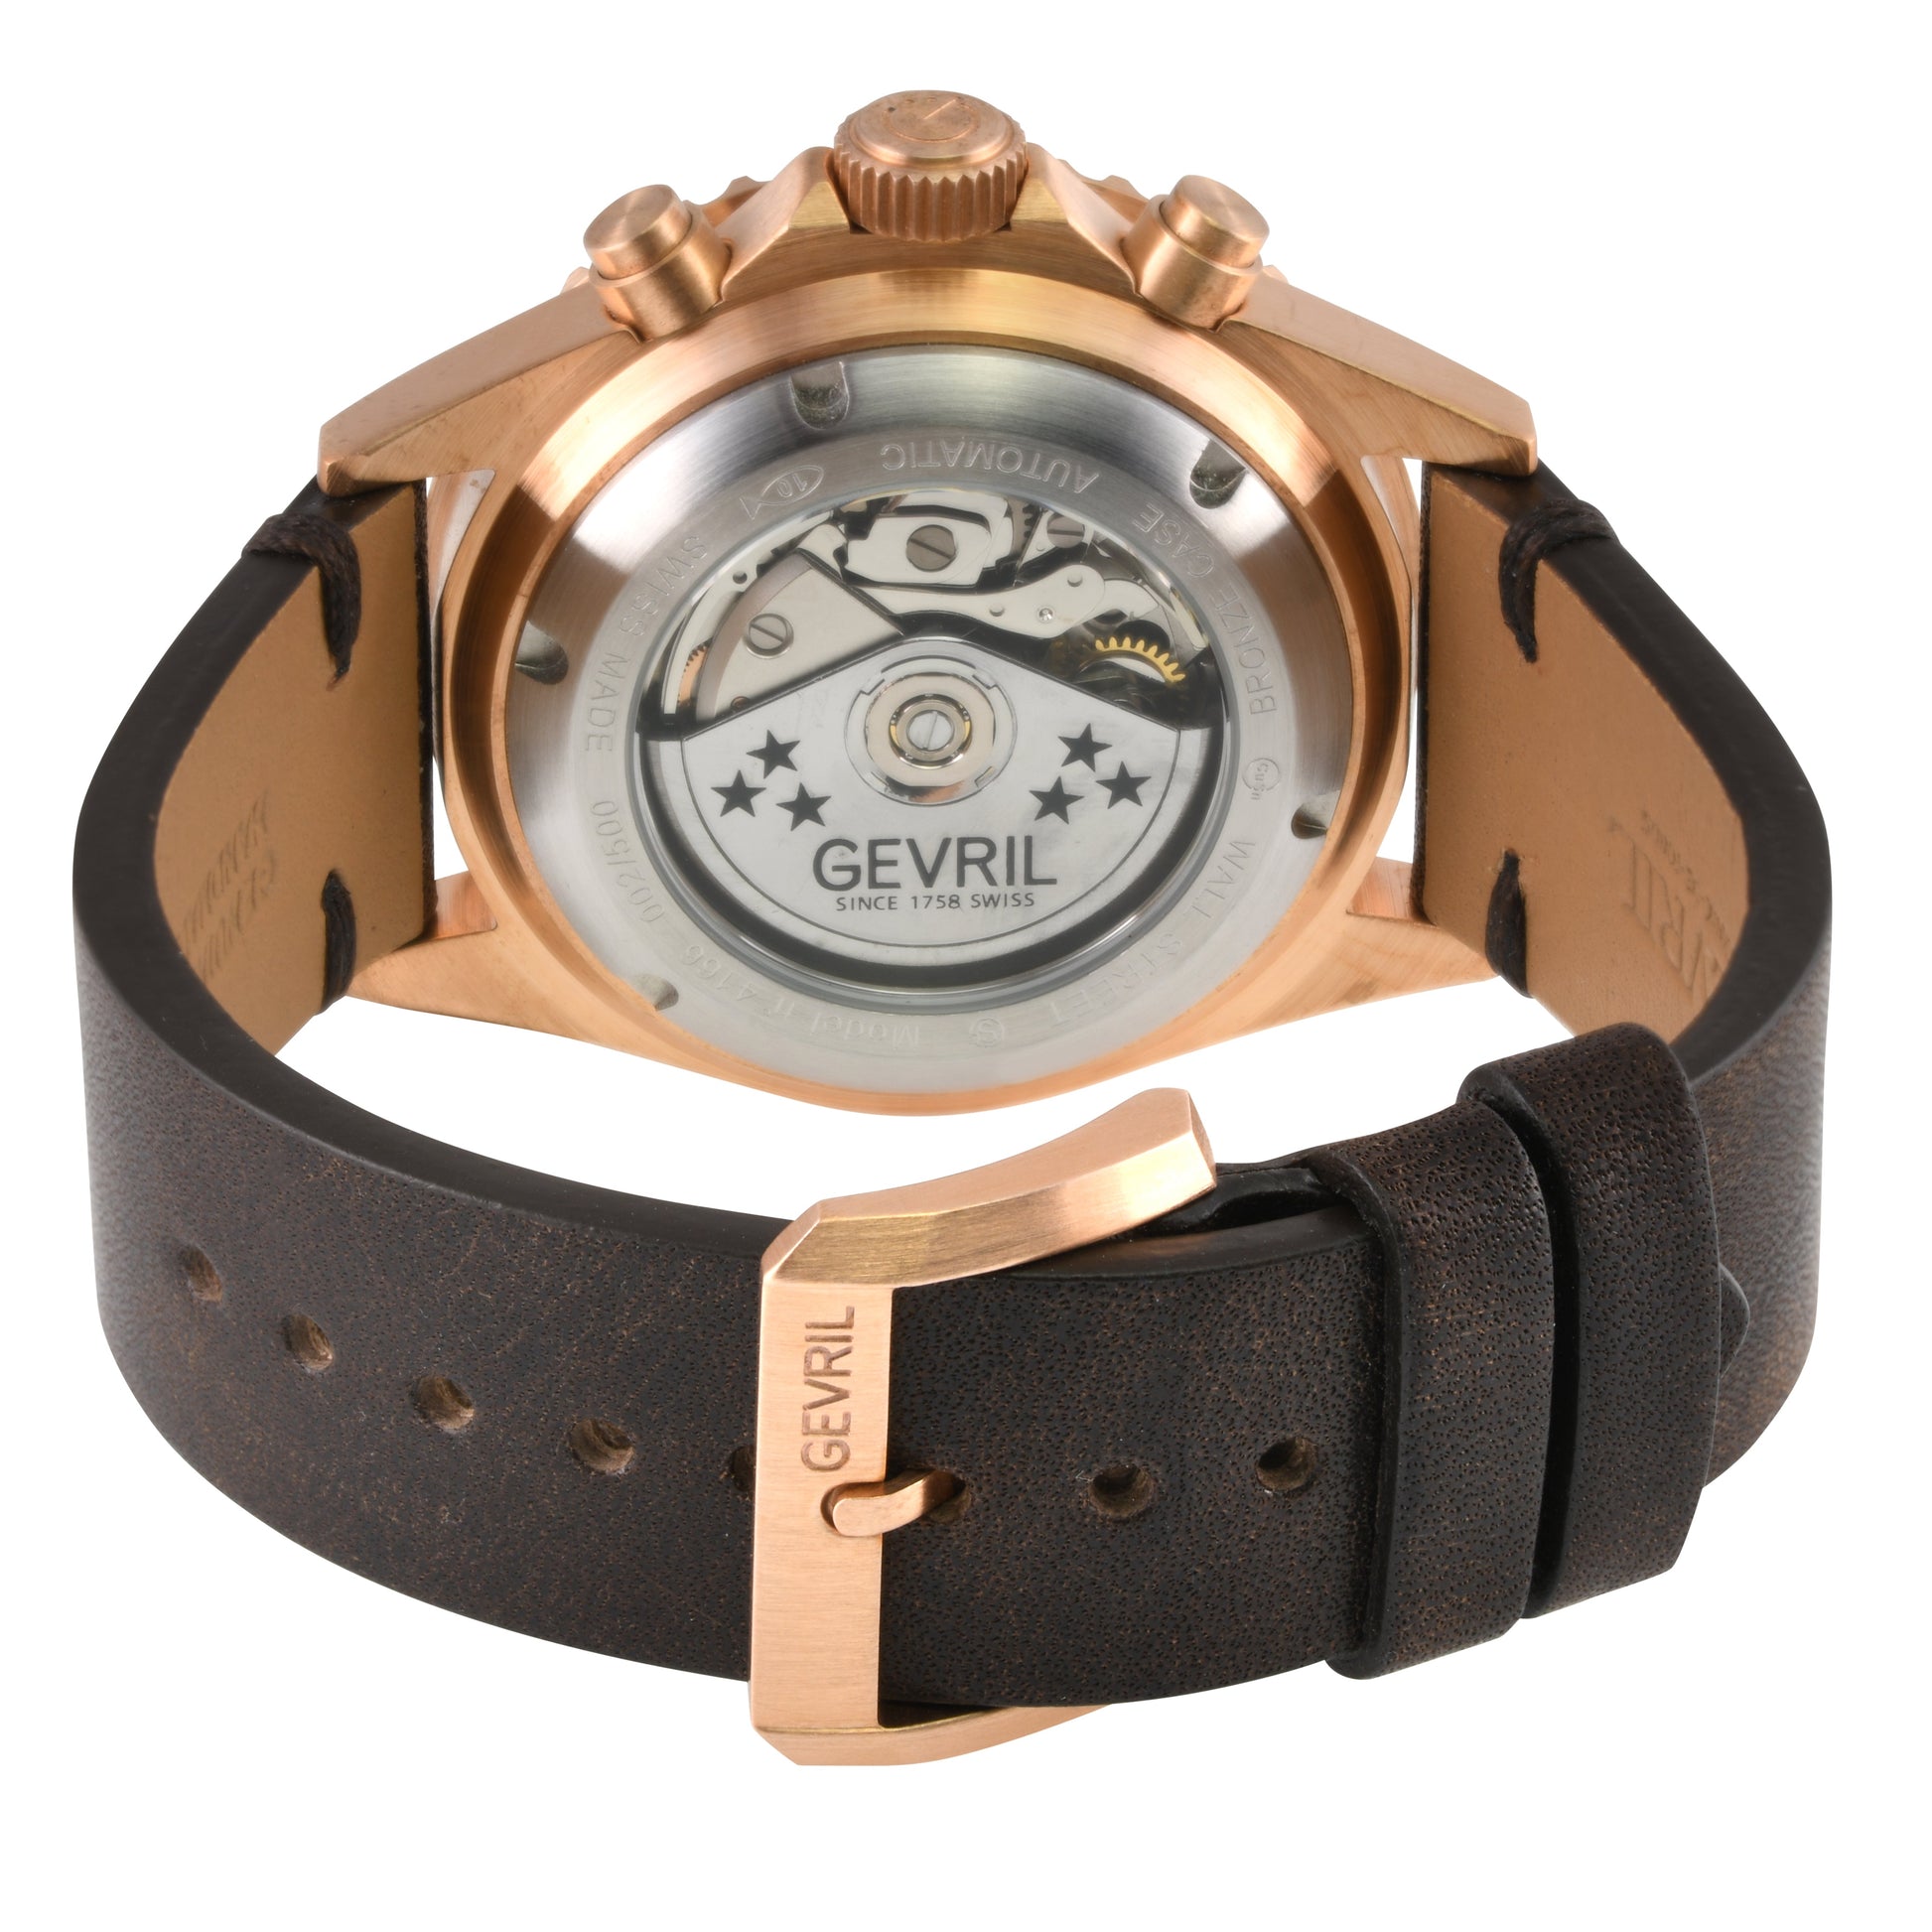 Gevril-Luxury-Swiss-Watches-Gevril Wall Street Chronograph - Bronze-4160-1